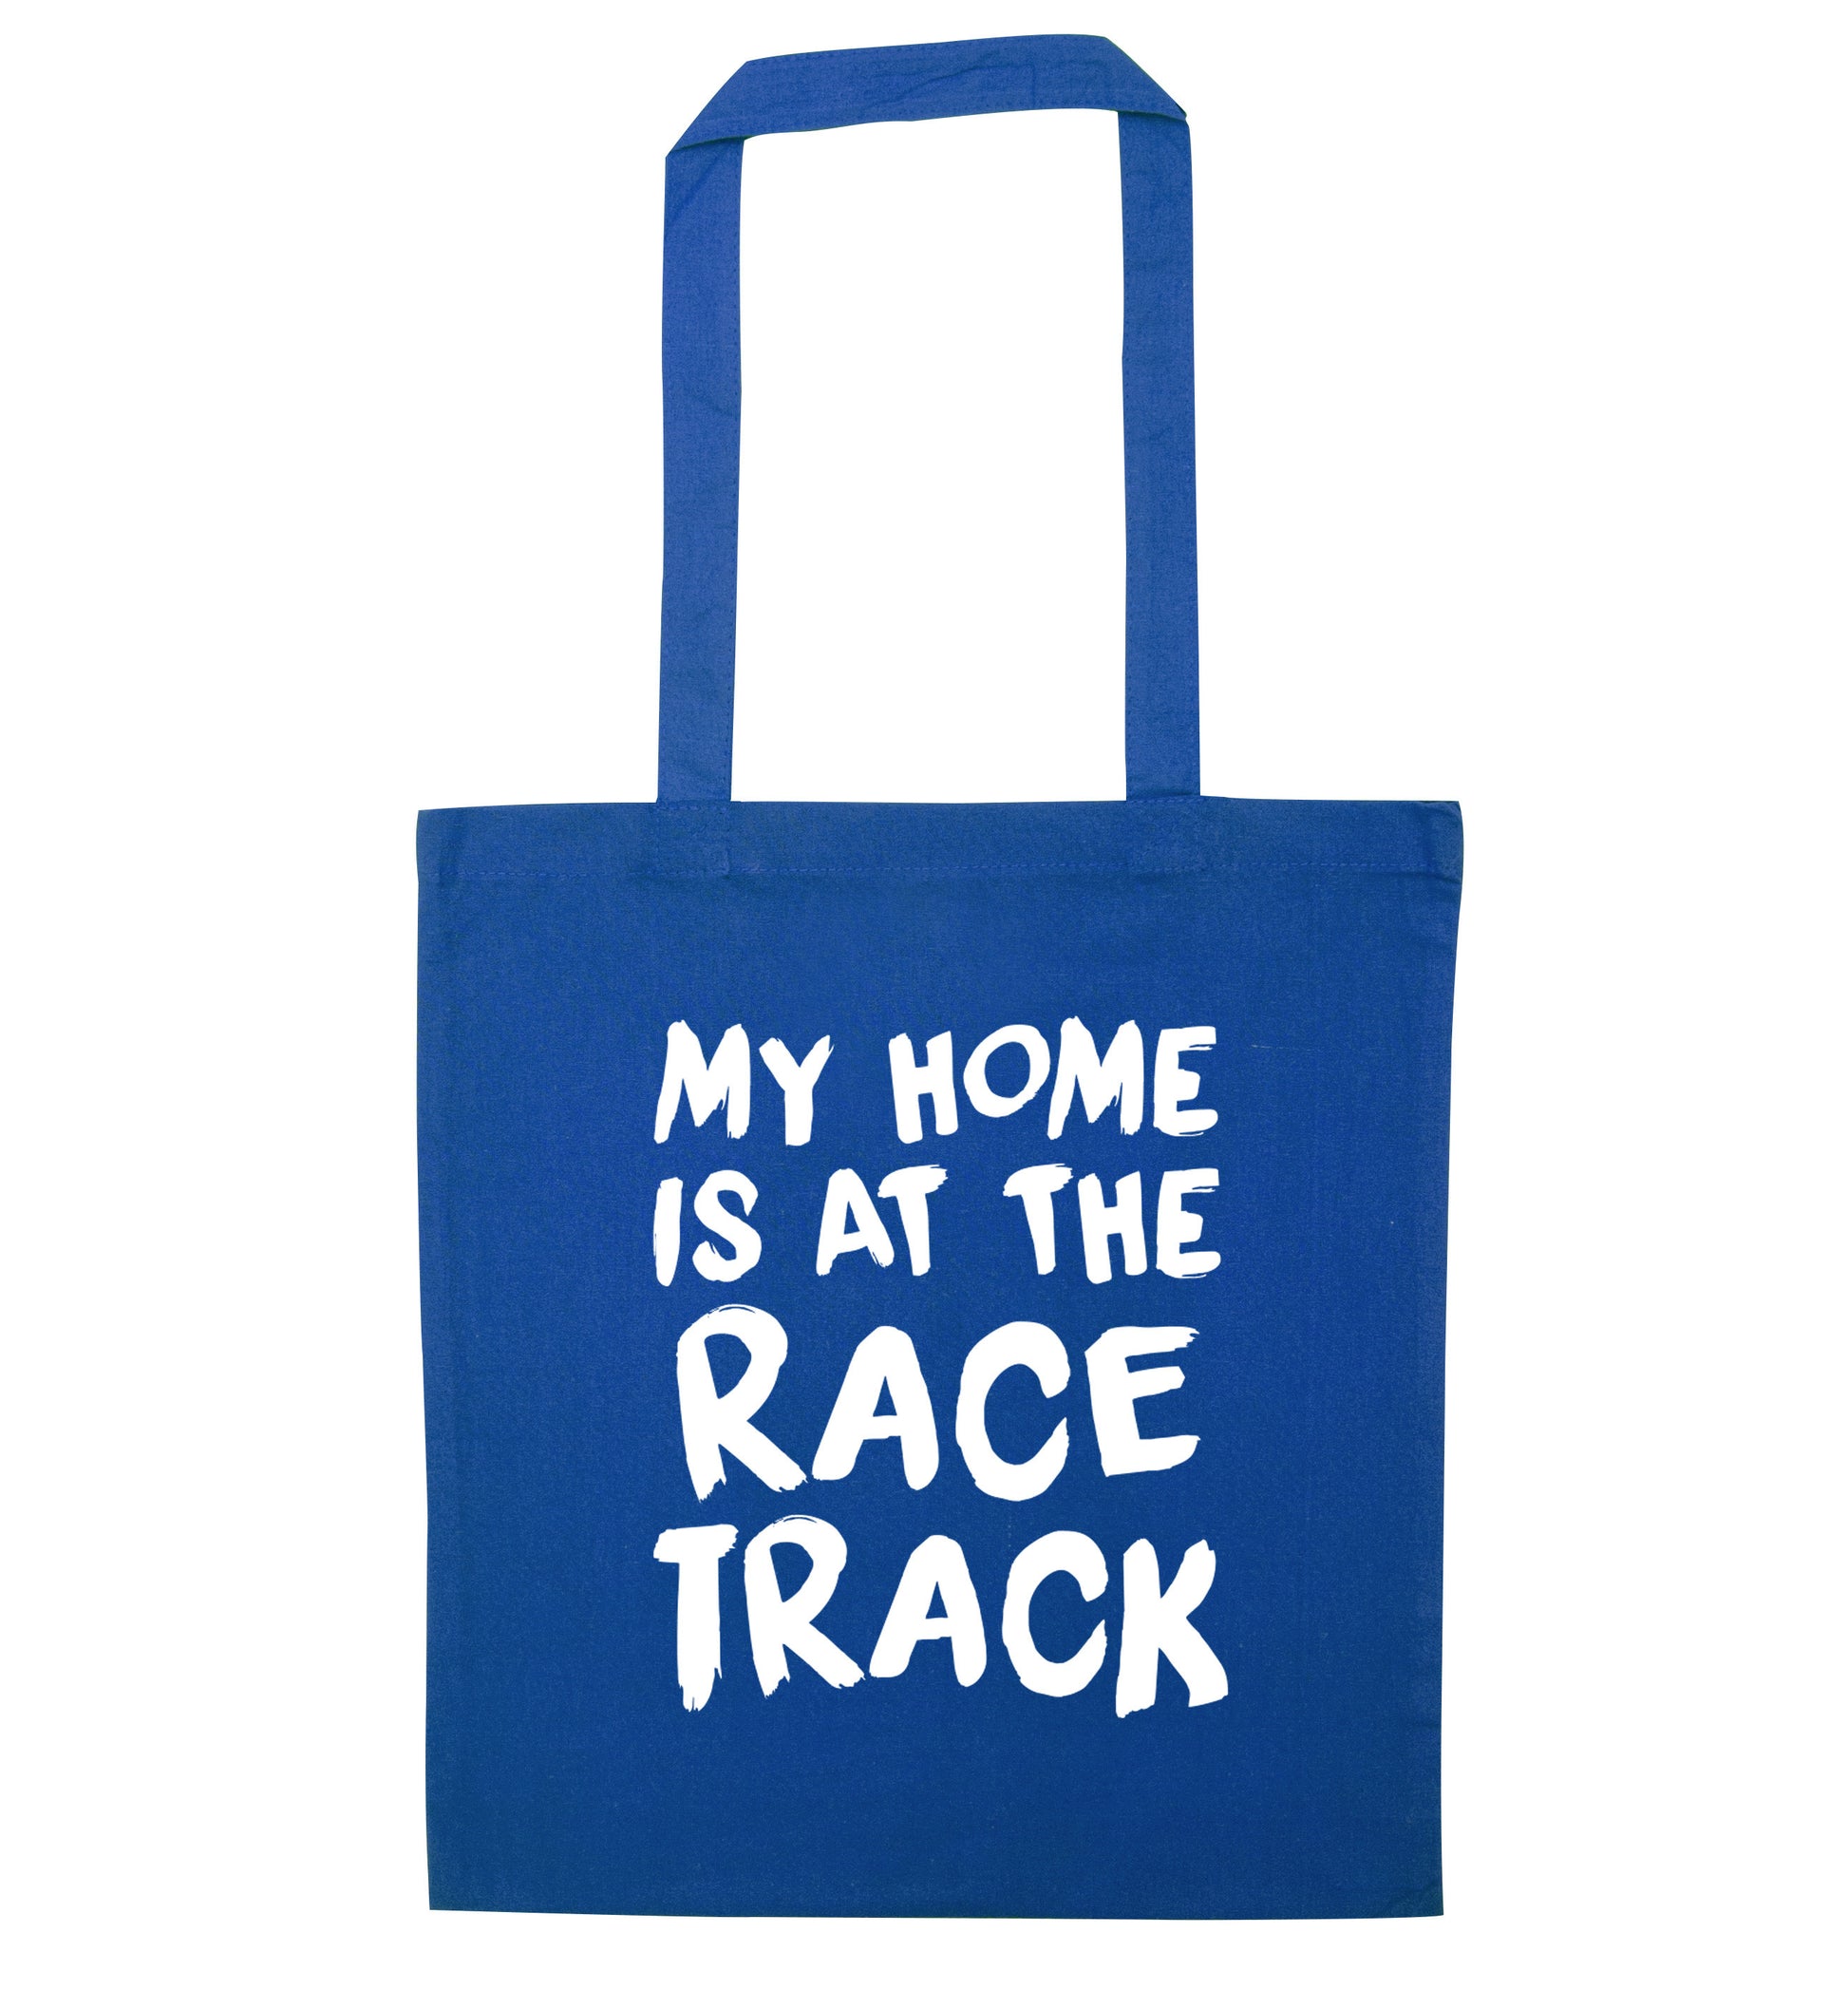 My home is at the race track blue tote bag